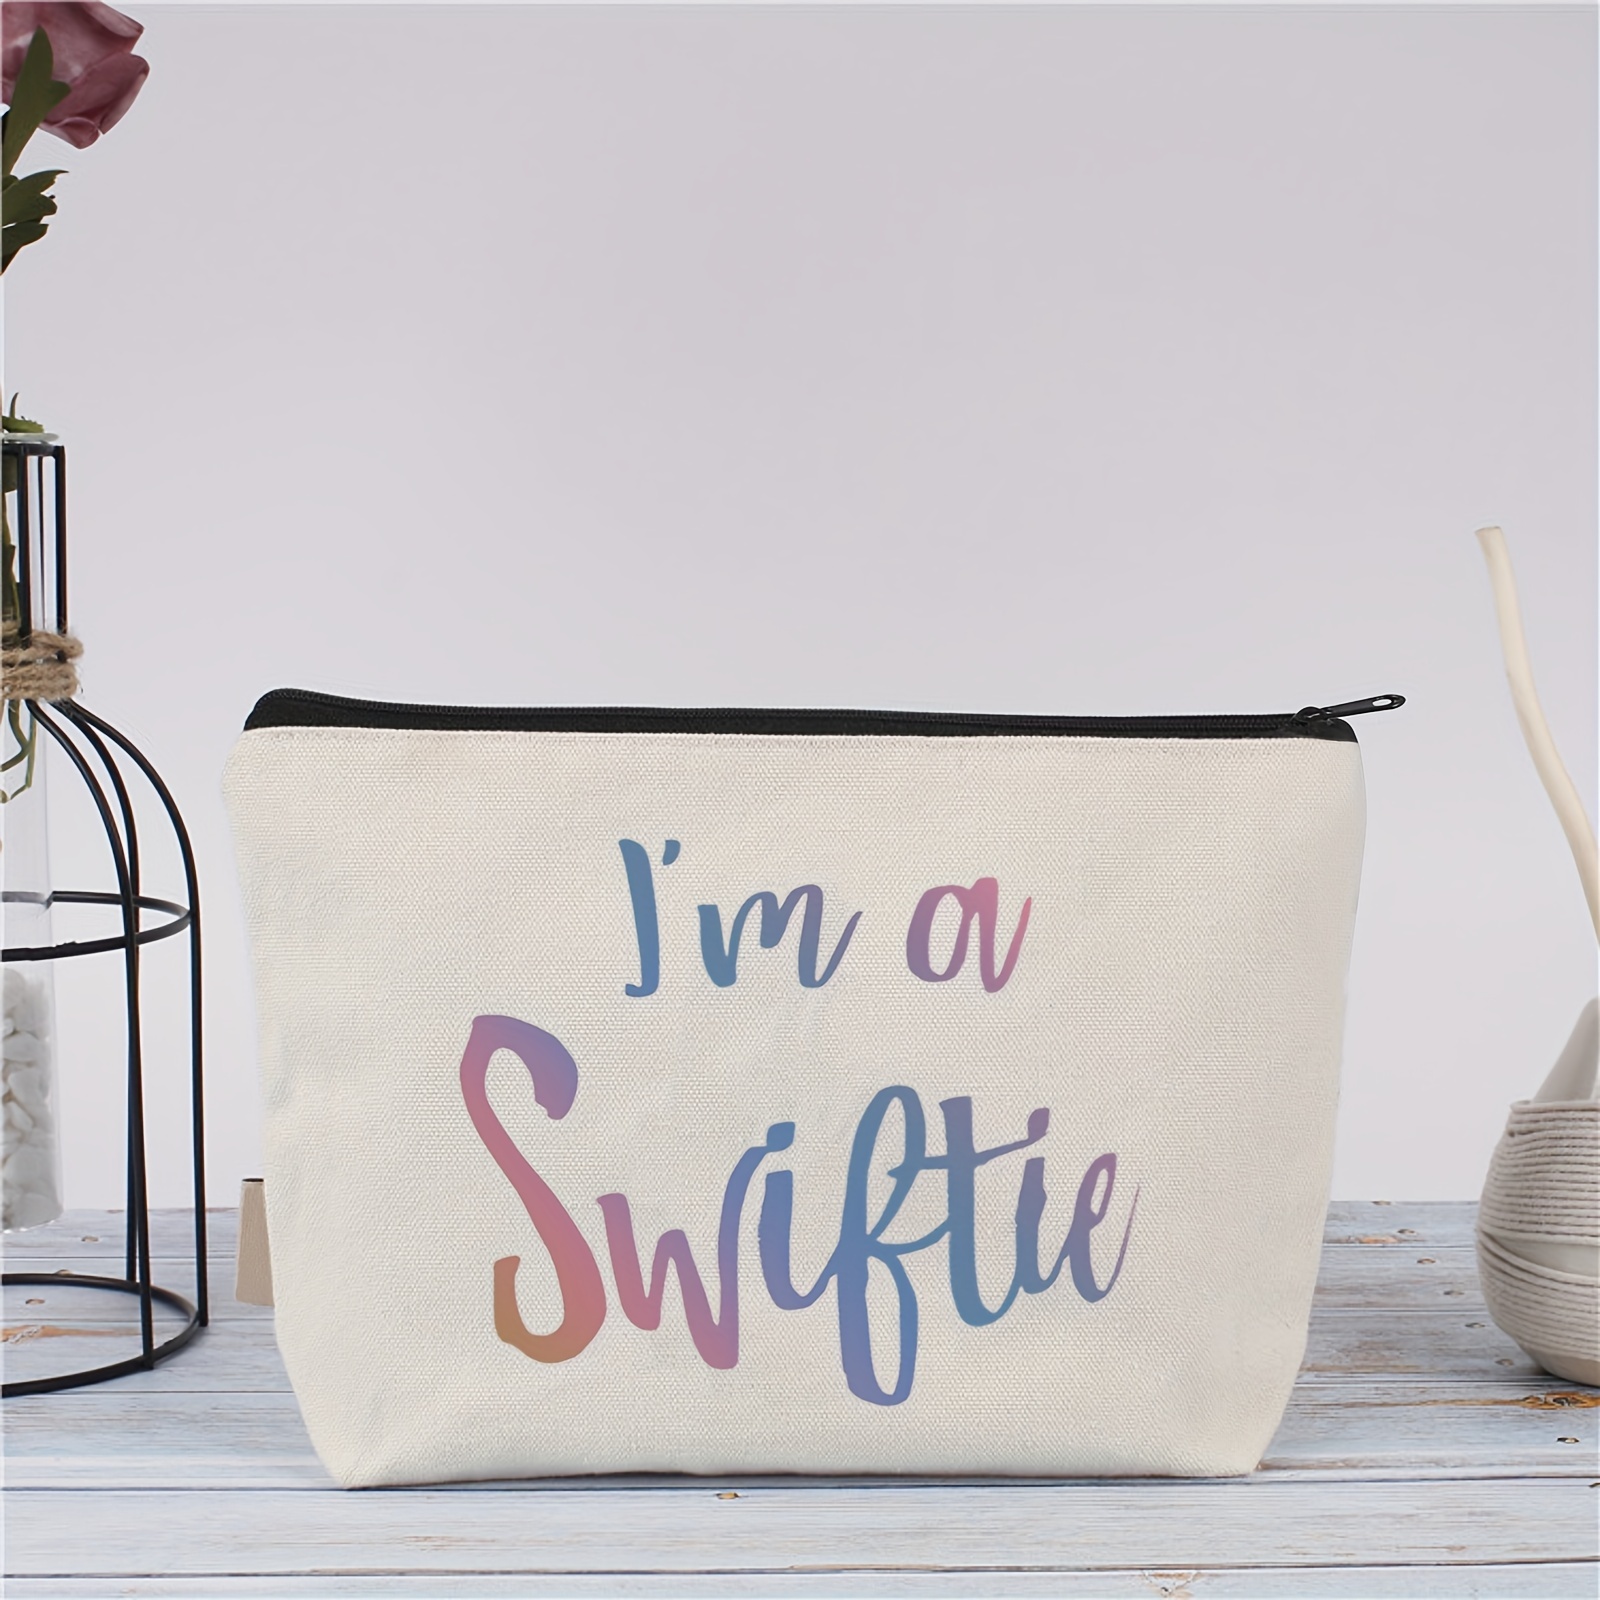 I'm a Swifty Make-up Bag, Taylor Swift Makeup Case, New , With Free  Shipping